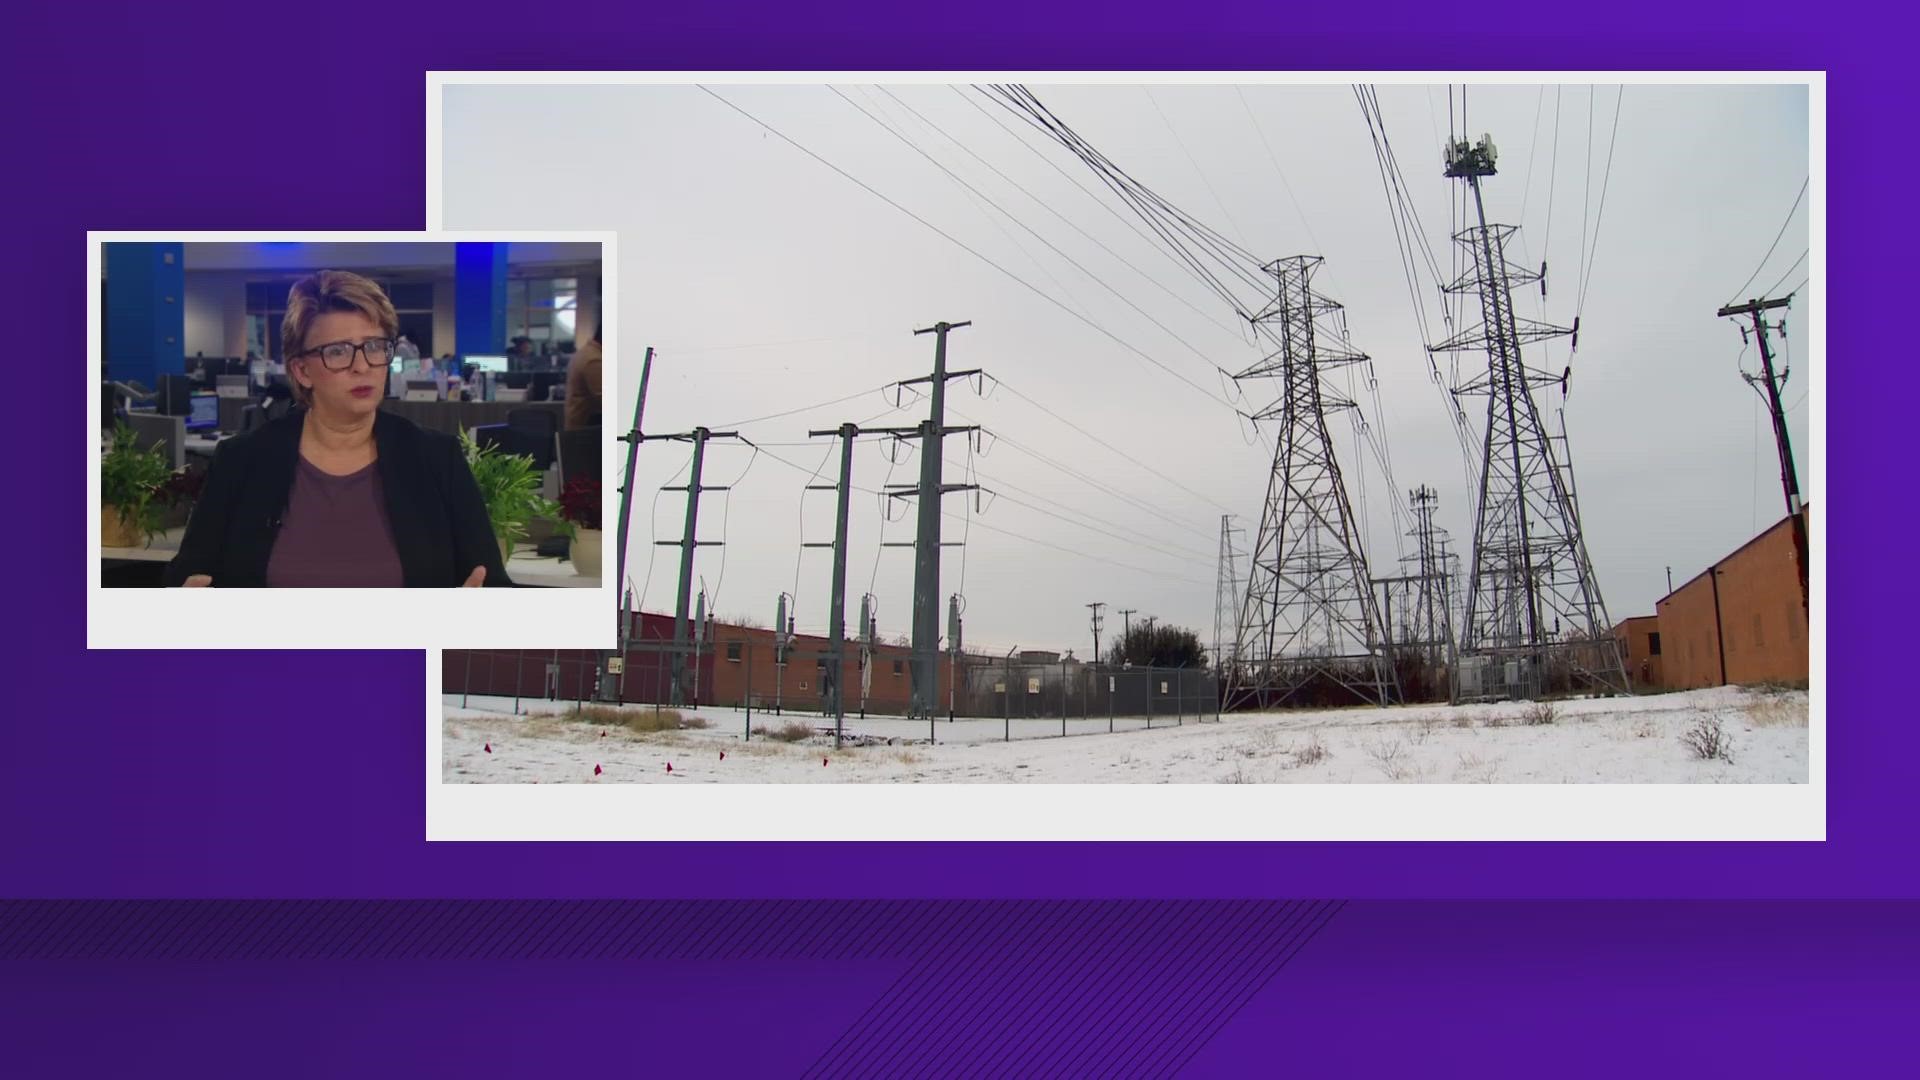 WFAA investigative reporter Tanya Eiserer provides an update on how the 2023 winter storm is impacting the Texas power grid.